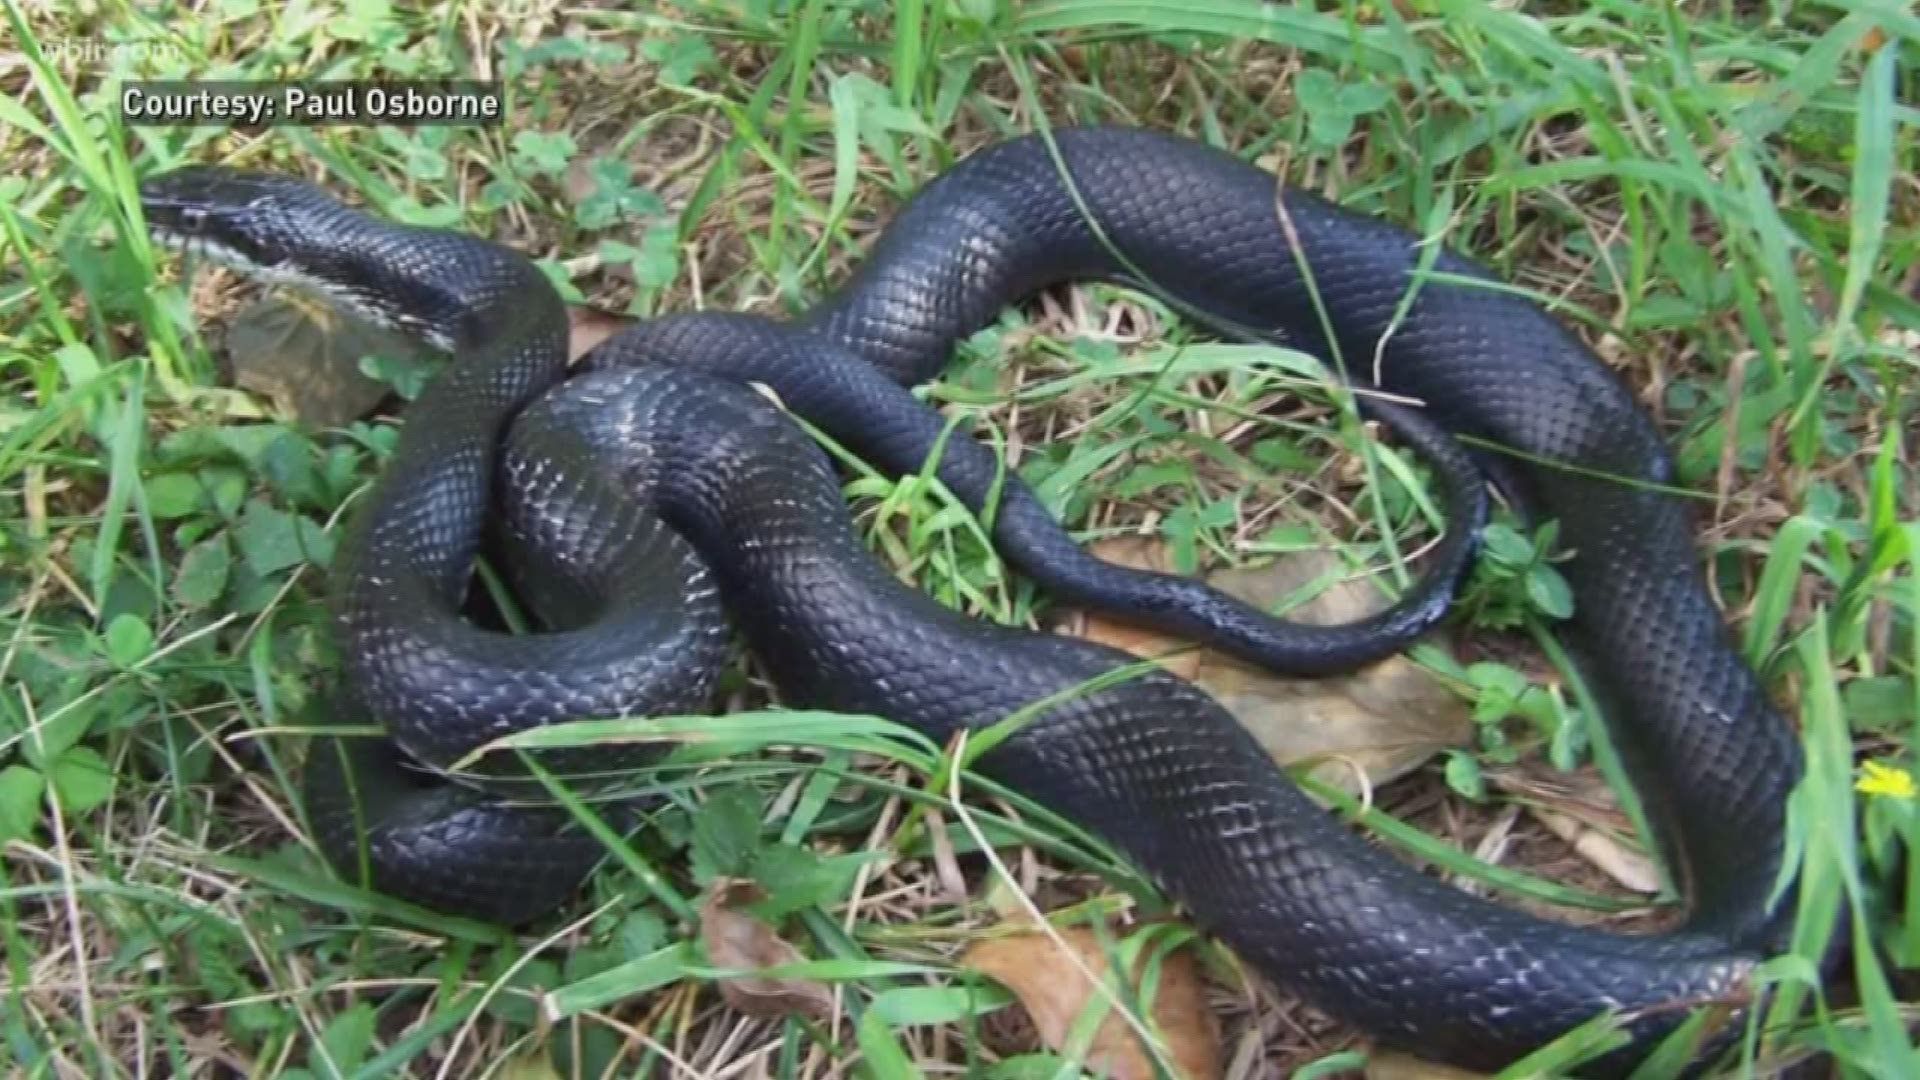 Snakes are back, here's how to keep them out of your home